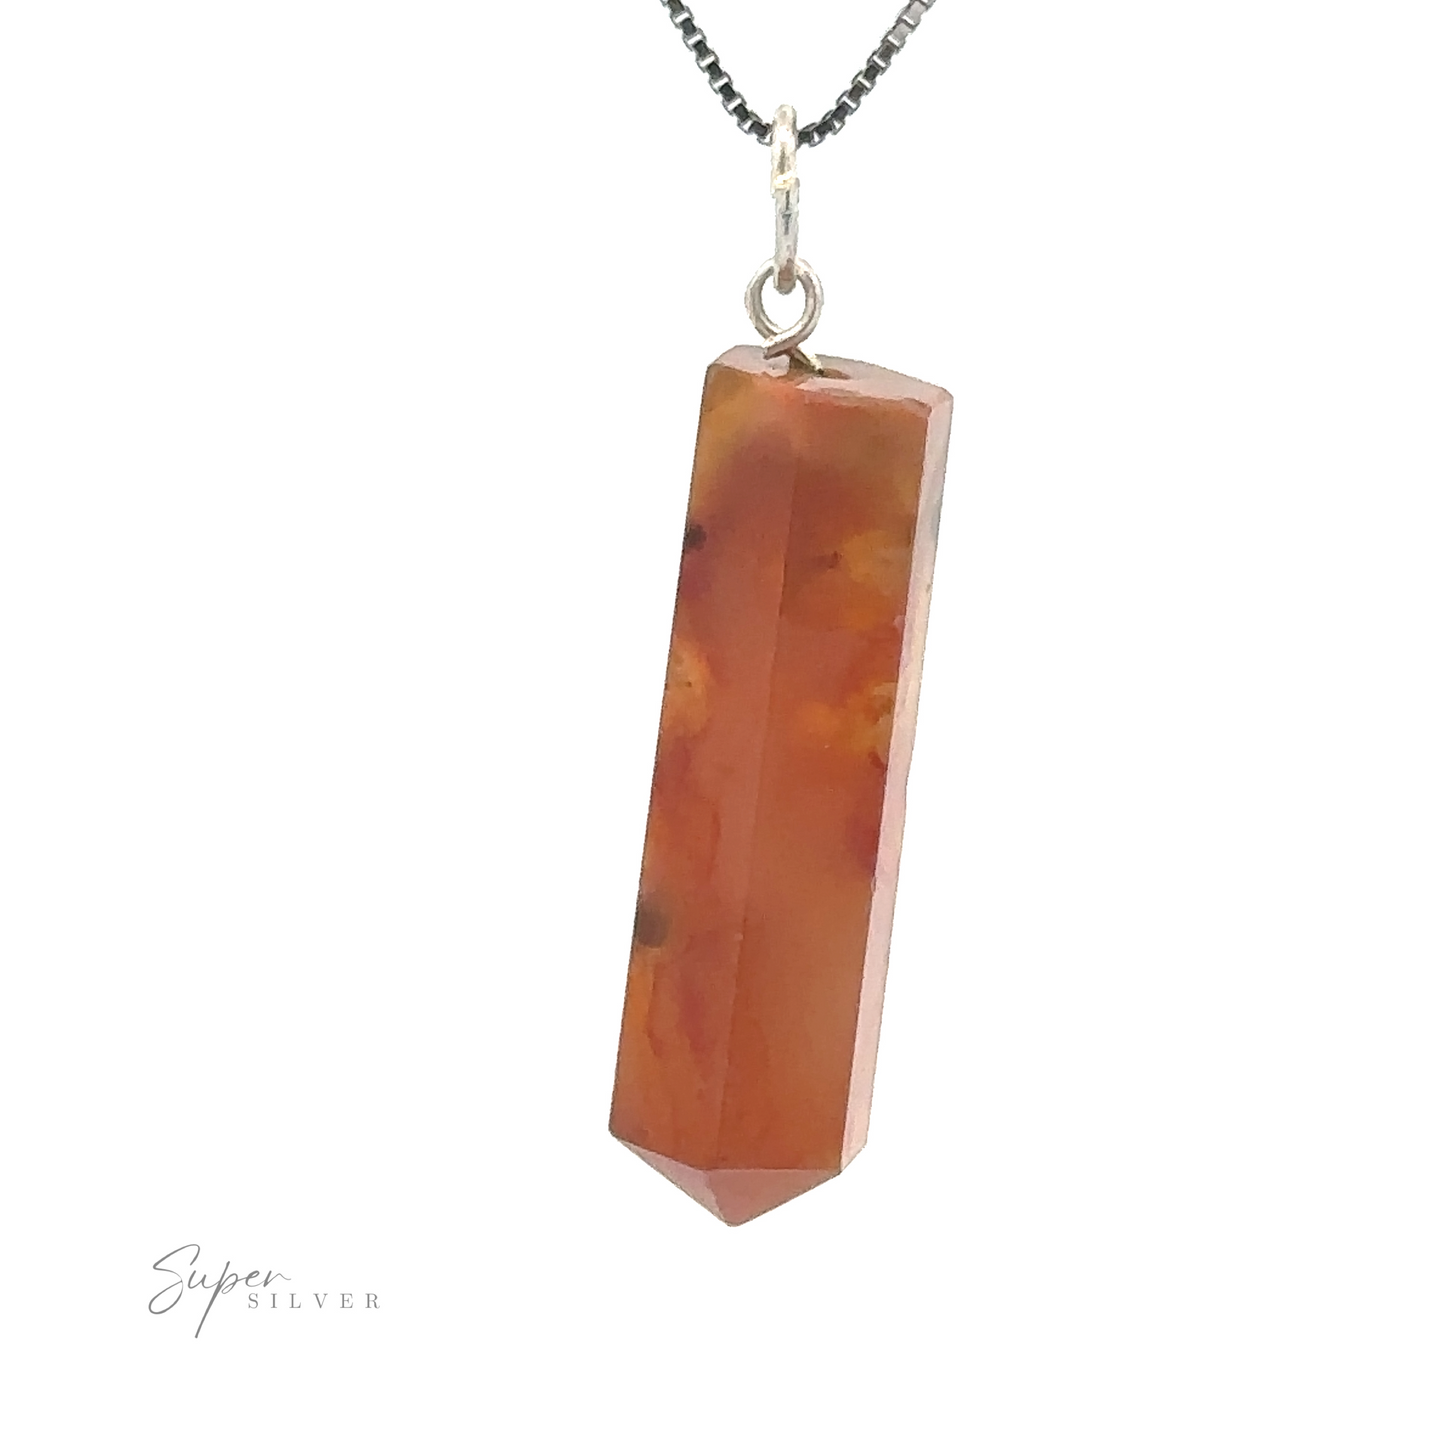 
                  
                    A Raw Stone Obelisk Pendant with slight color variations hangs elegantly from a mixed metals silver chain. The image features the "Super Silver" logo in the lower-left corner.
                  
                